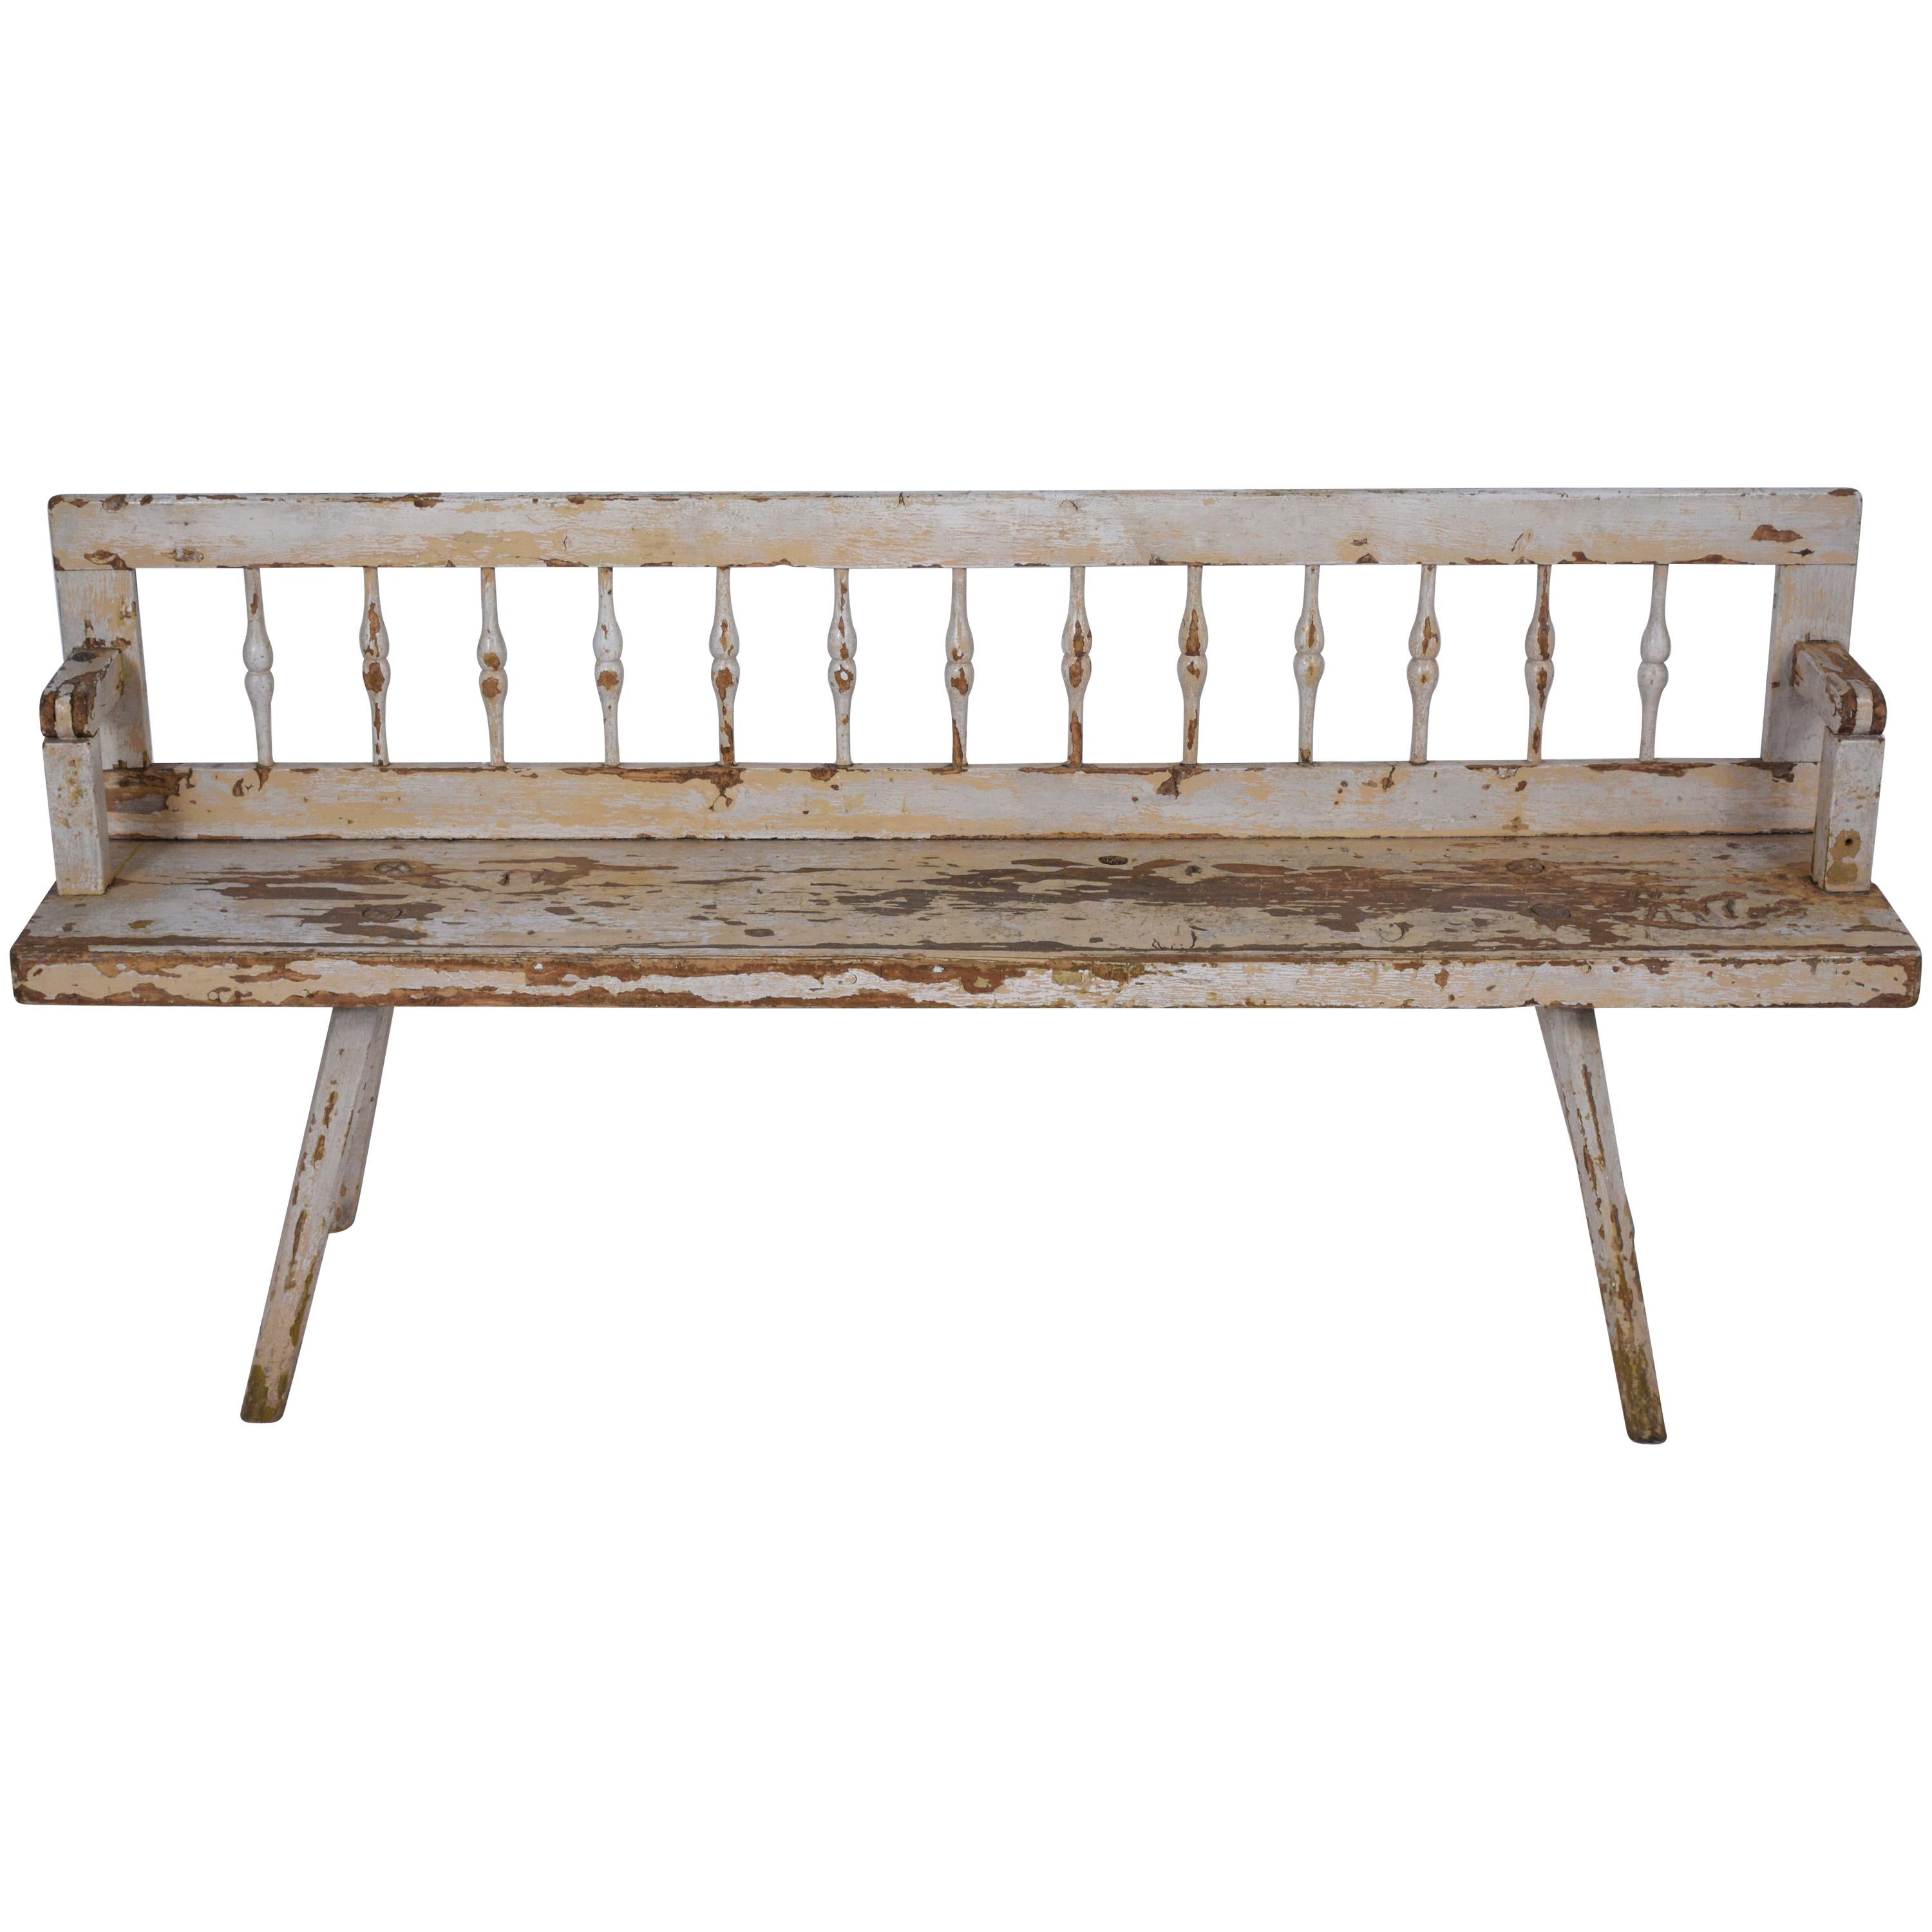 Antique Distressed Painted Bench